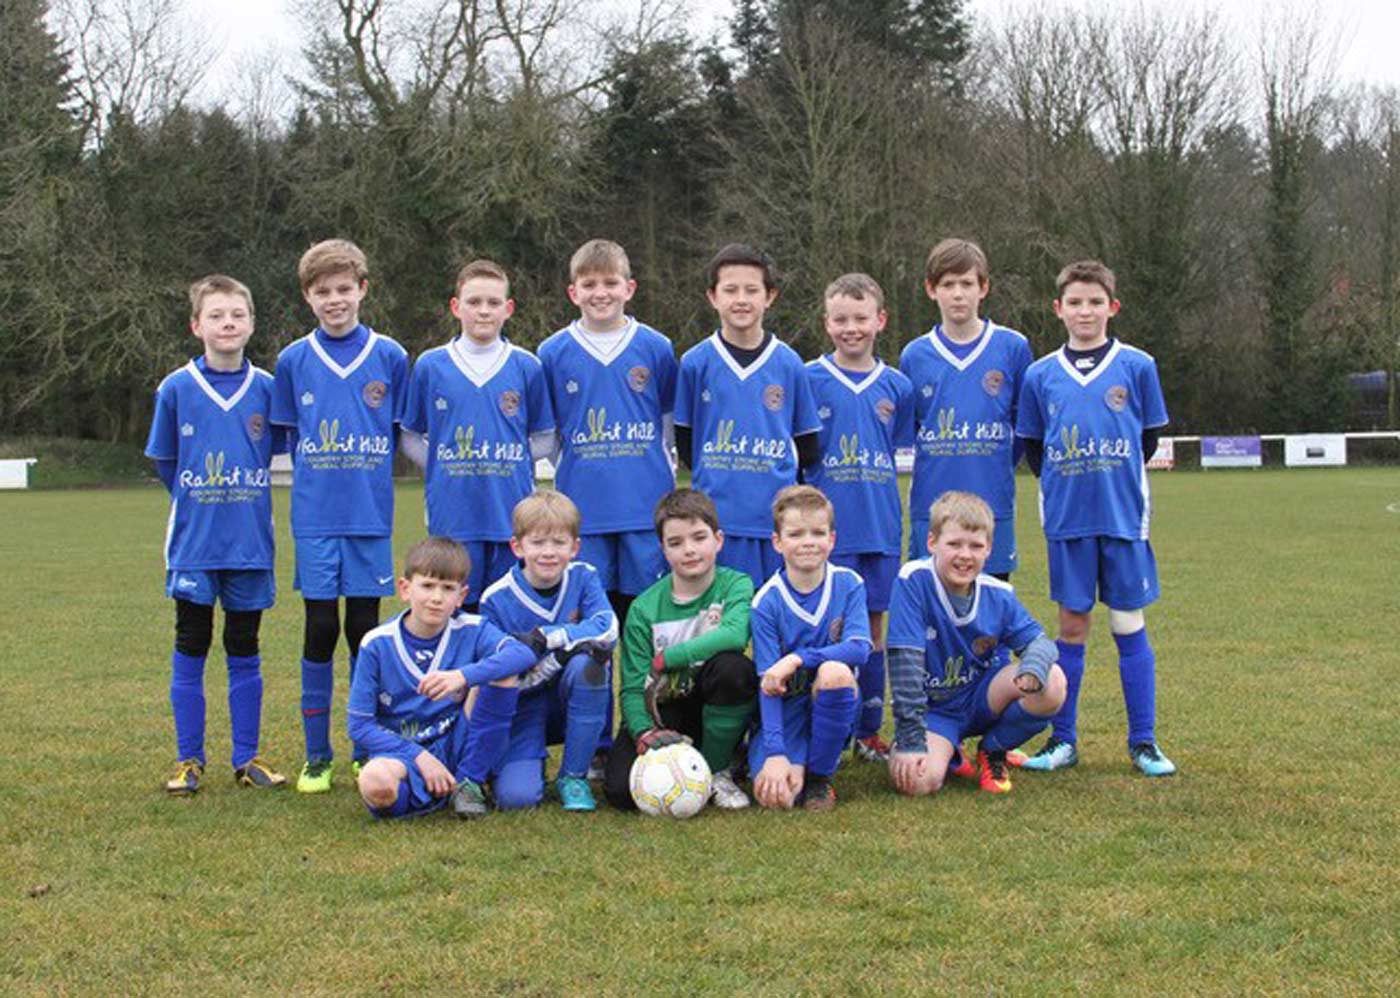 Boroughbridge Juniors FC under 11s team has a new kit thanks to local business Rabbit Hill Country Store and Rural Supplies